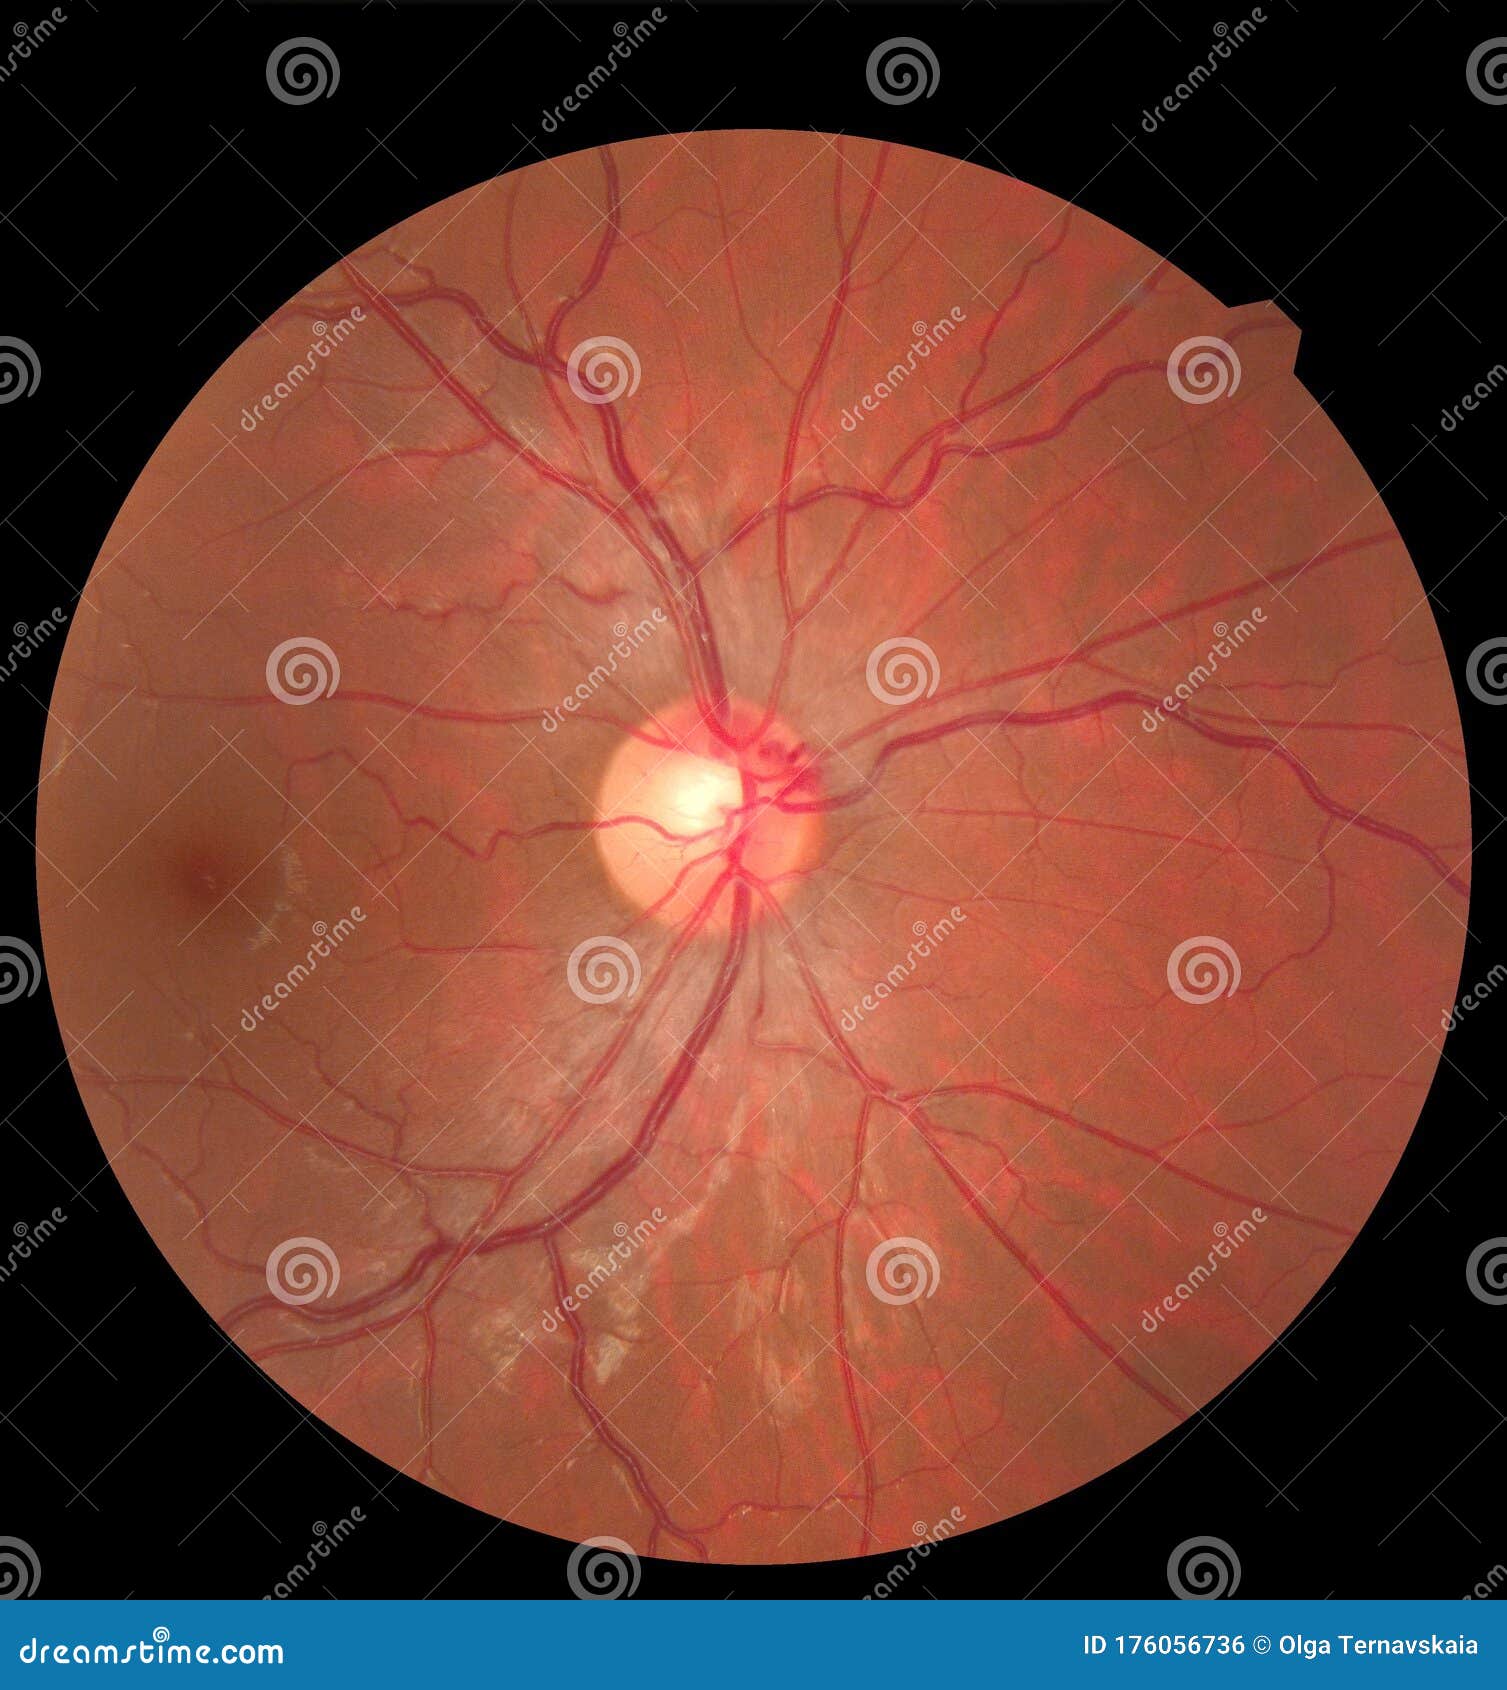 ophthalmic image detailing the retina and optic nerve inside a healthy human eye. health protection concept